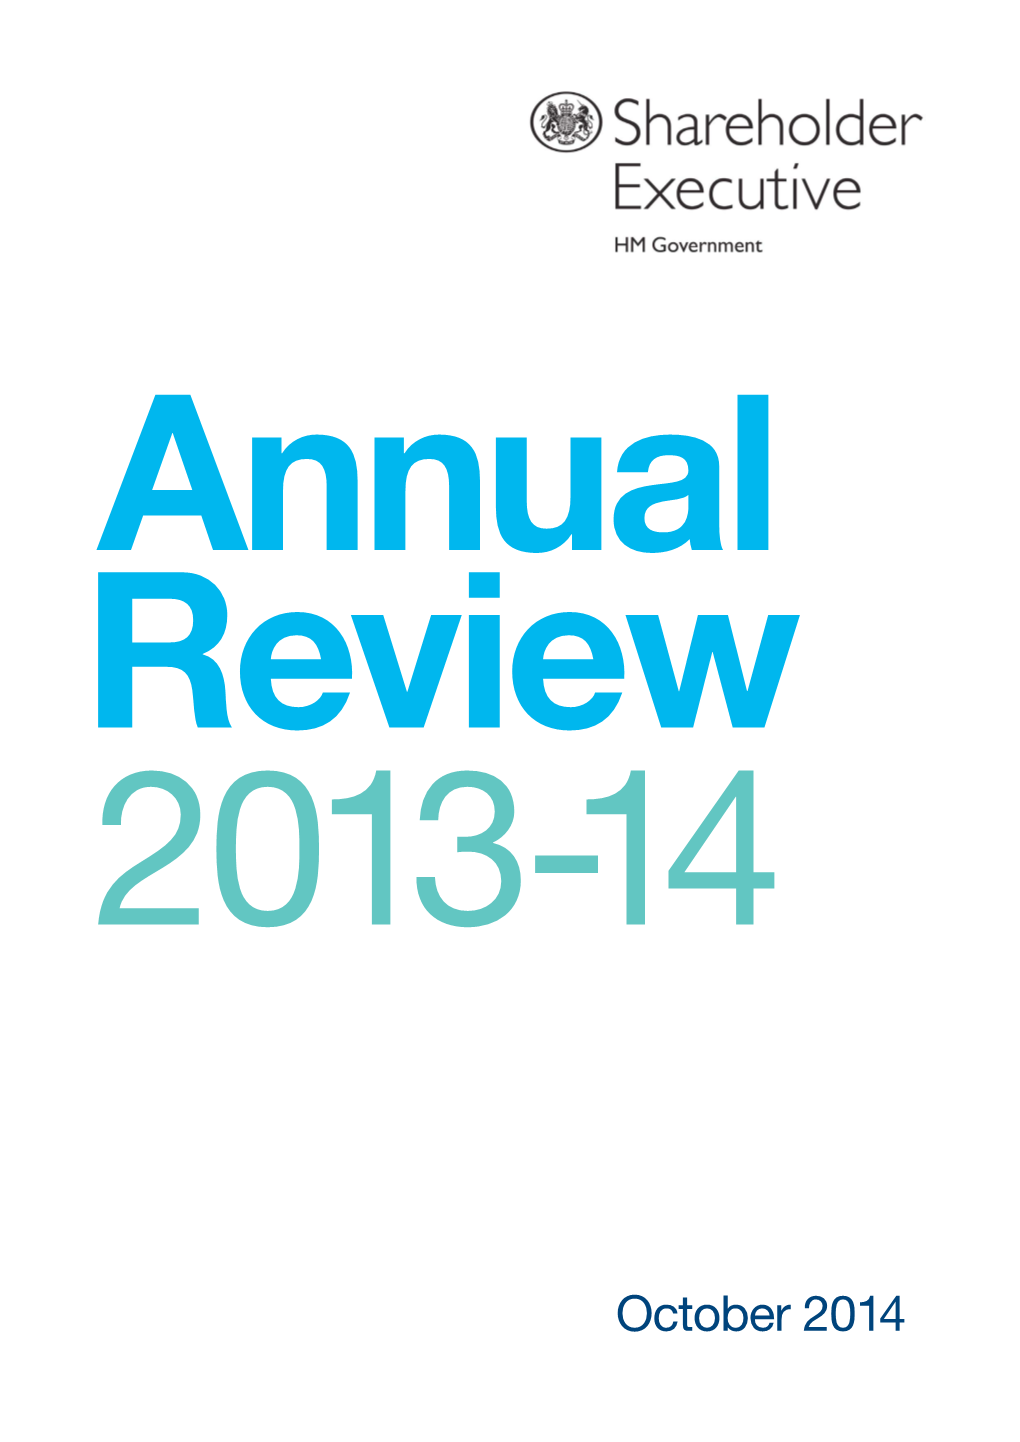 Shareholder Executive Annual Review 2013-14